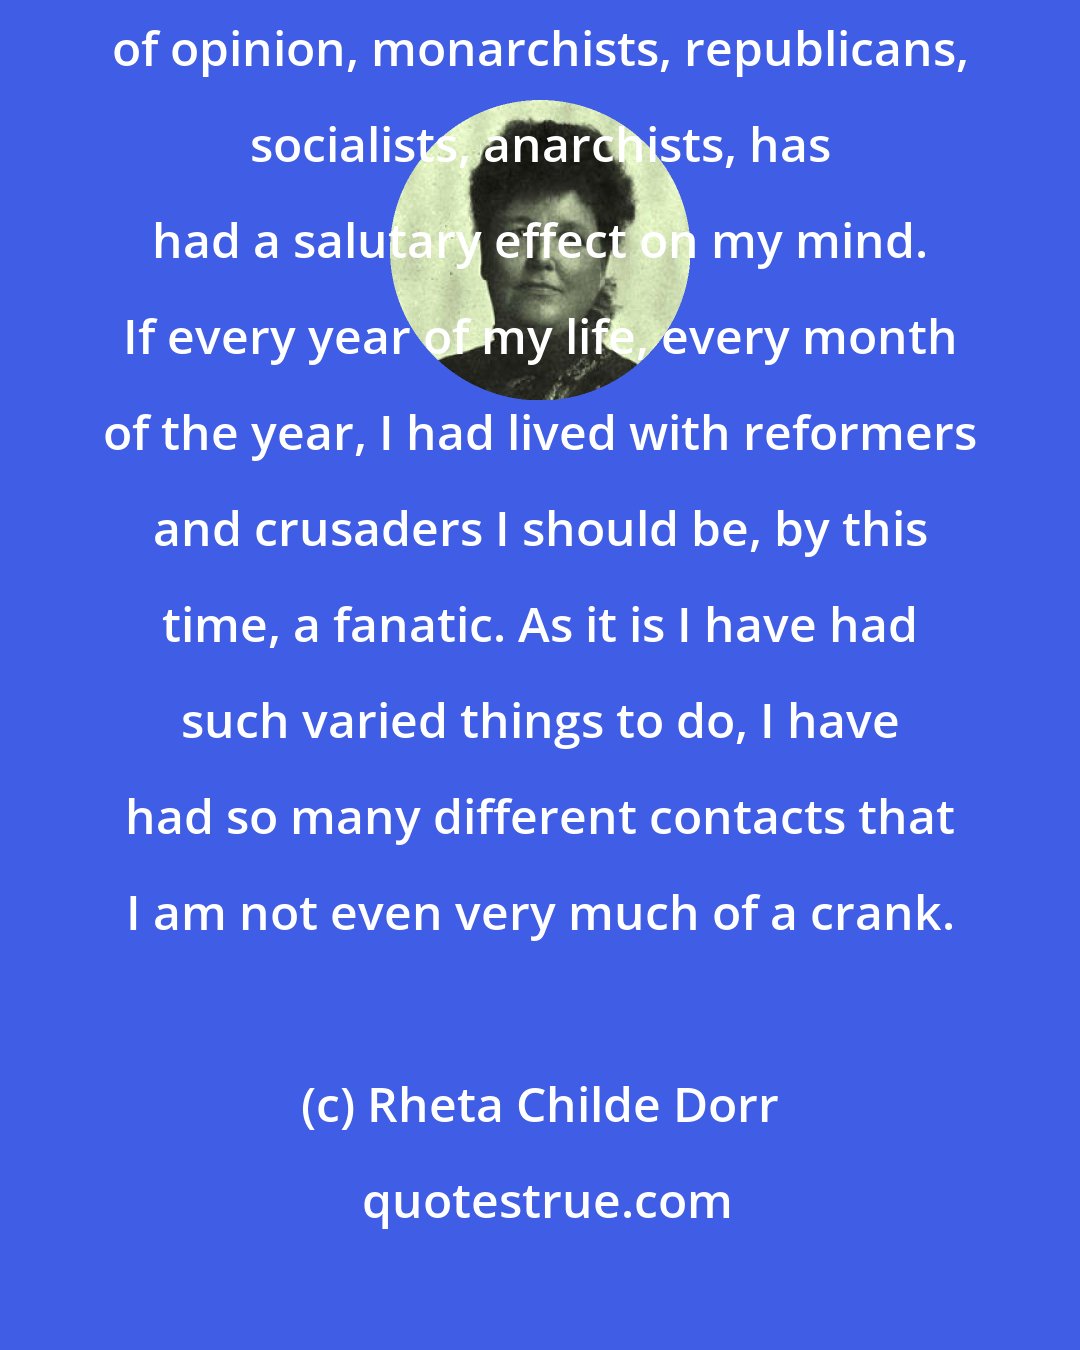 Rheta Childe Dorr: Living more lives than one, knowing people of all classes, all shades of opinion, monarchists, republicans, socialists, anarchists, has had a salutary effect on my mind. If every year of my life, every month of the year, I had lived with reformers and crusaders I should be, by this time, a fanatic. As it is I have had such varied things to do, I have had so many different contacts that I am not even very much of a crank.